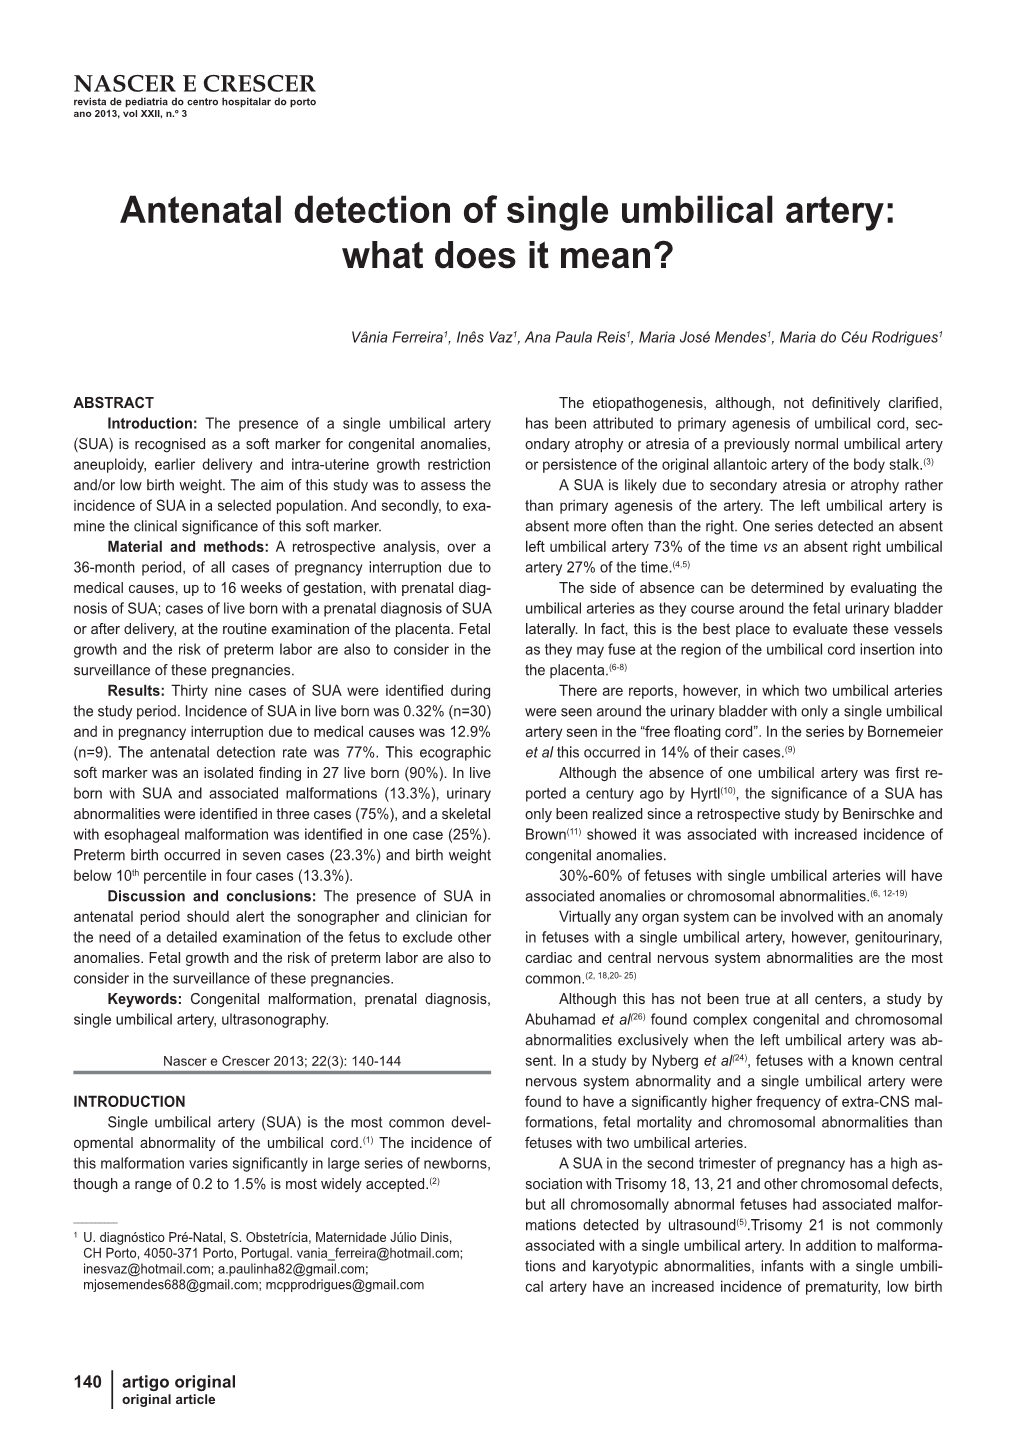 Antenatal Detection of Single Umbilical Artery: What Does It Mean?